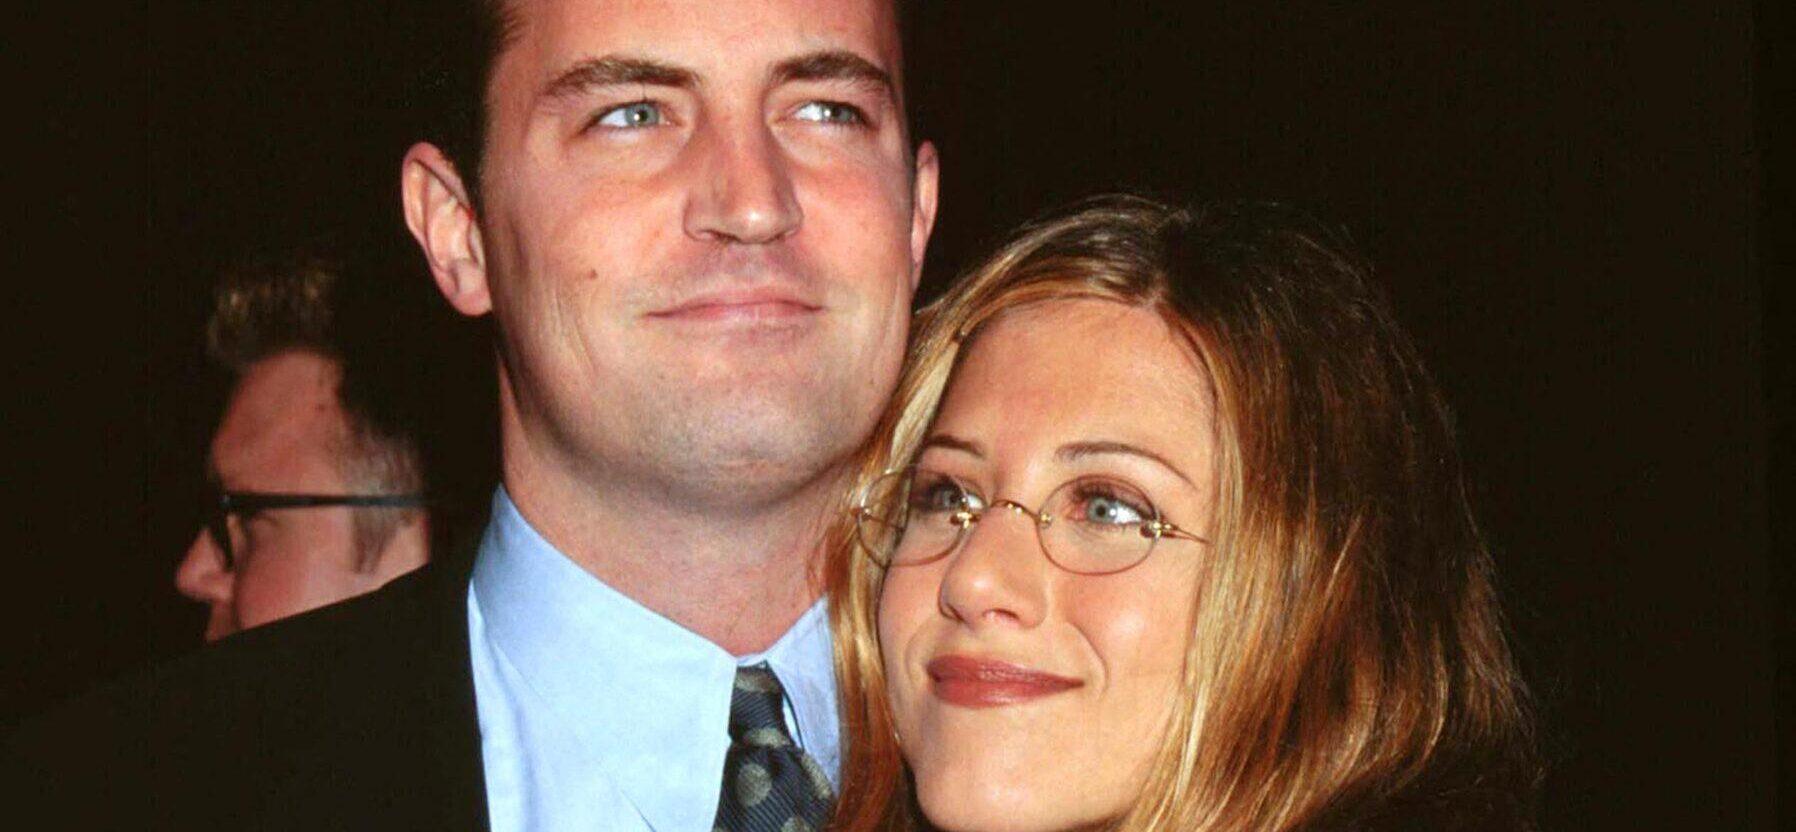 Jennifer Aniston Shows Support For Matthew Perry’s Foundation For ‘Giving Tuesday’